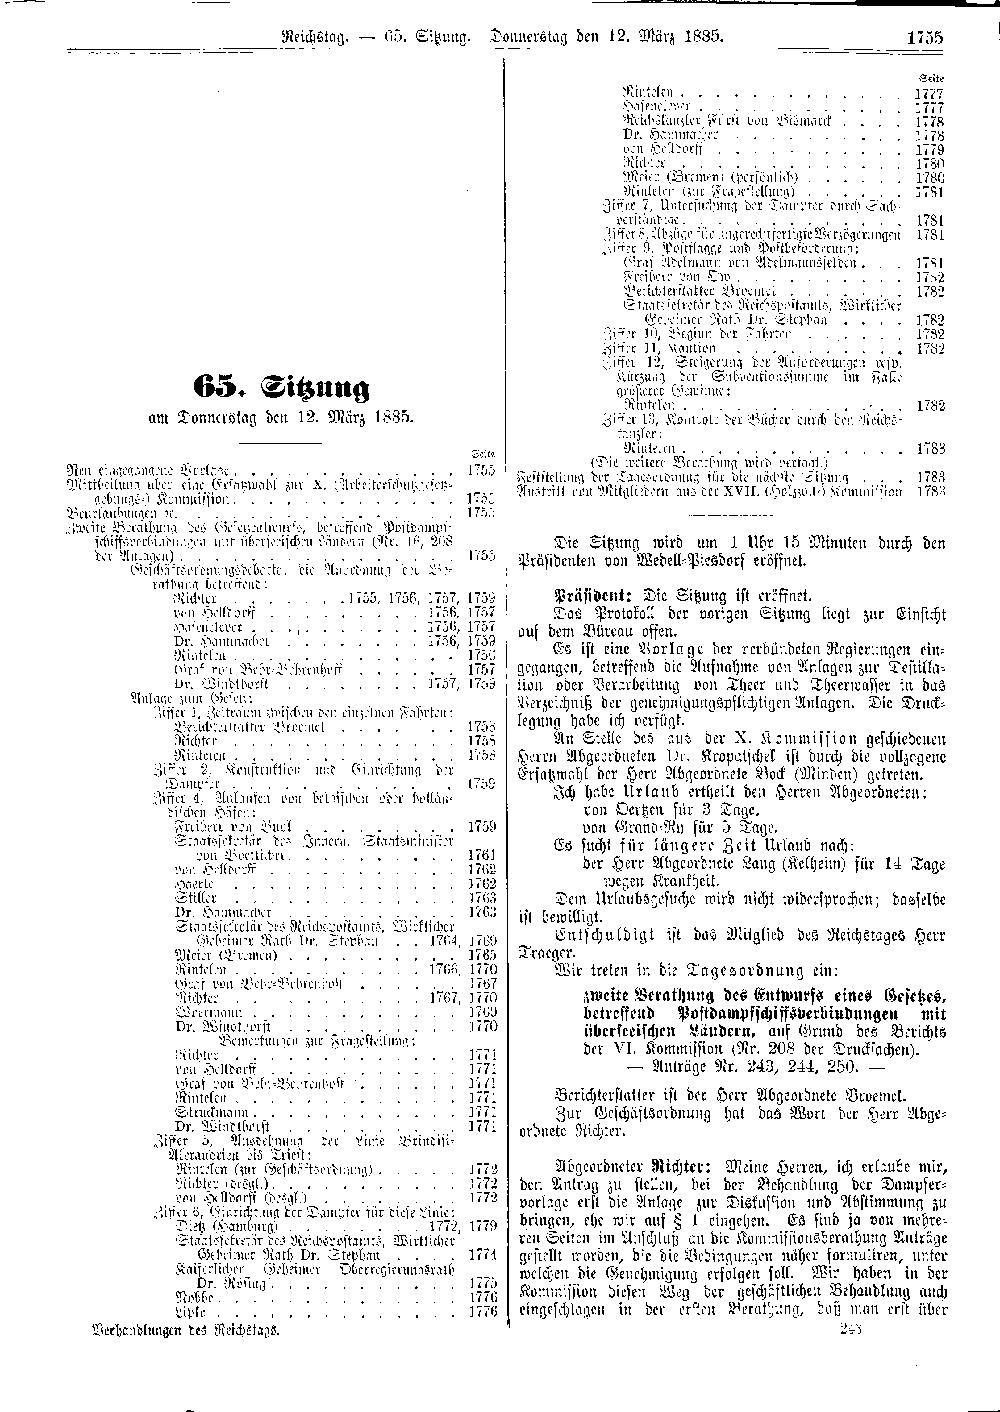 Scan of page 1755